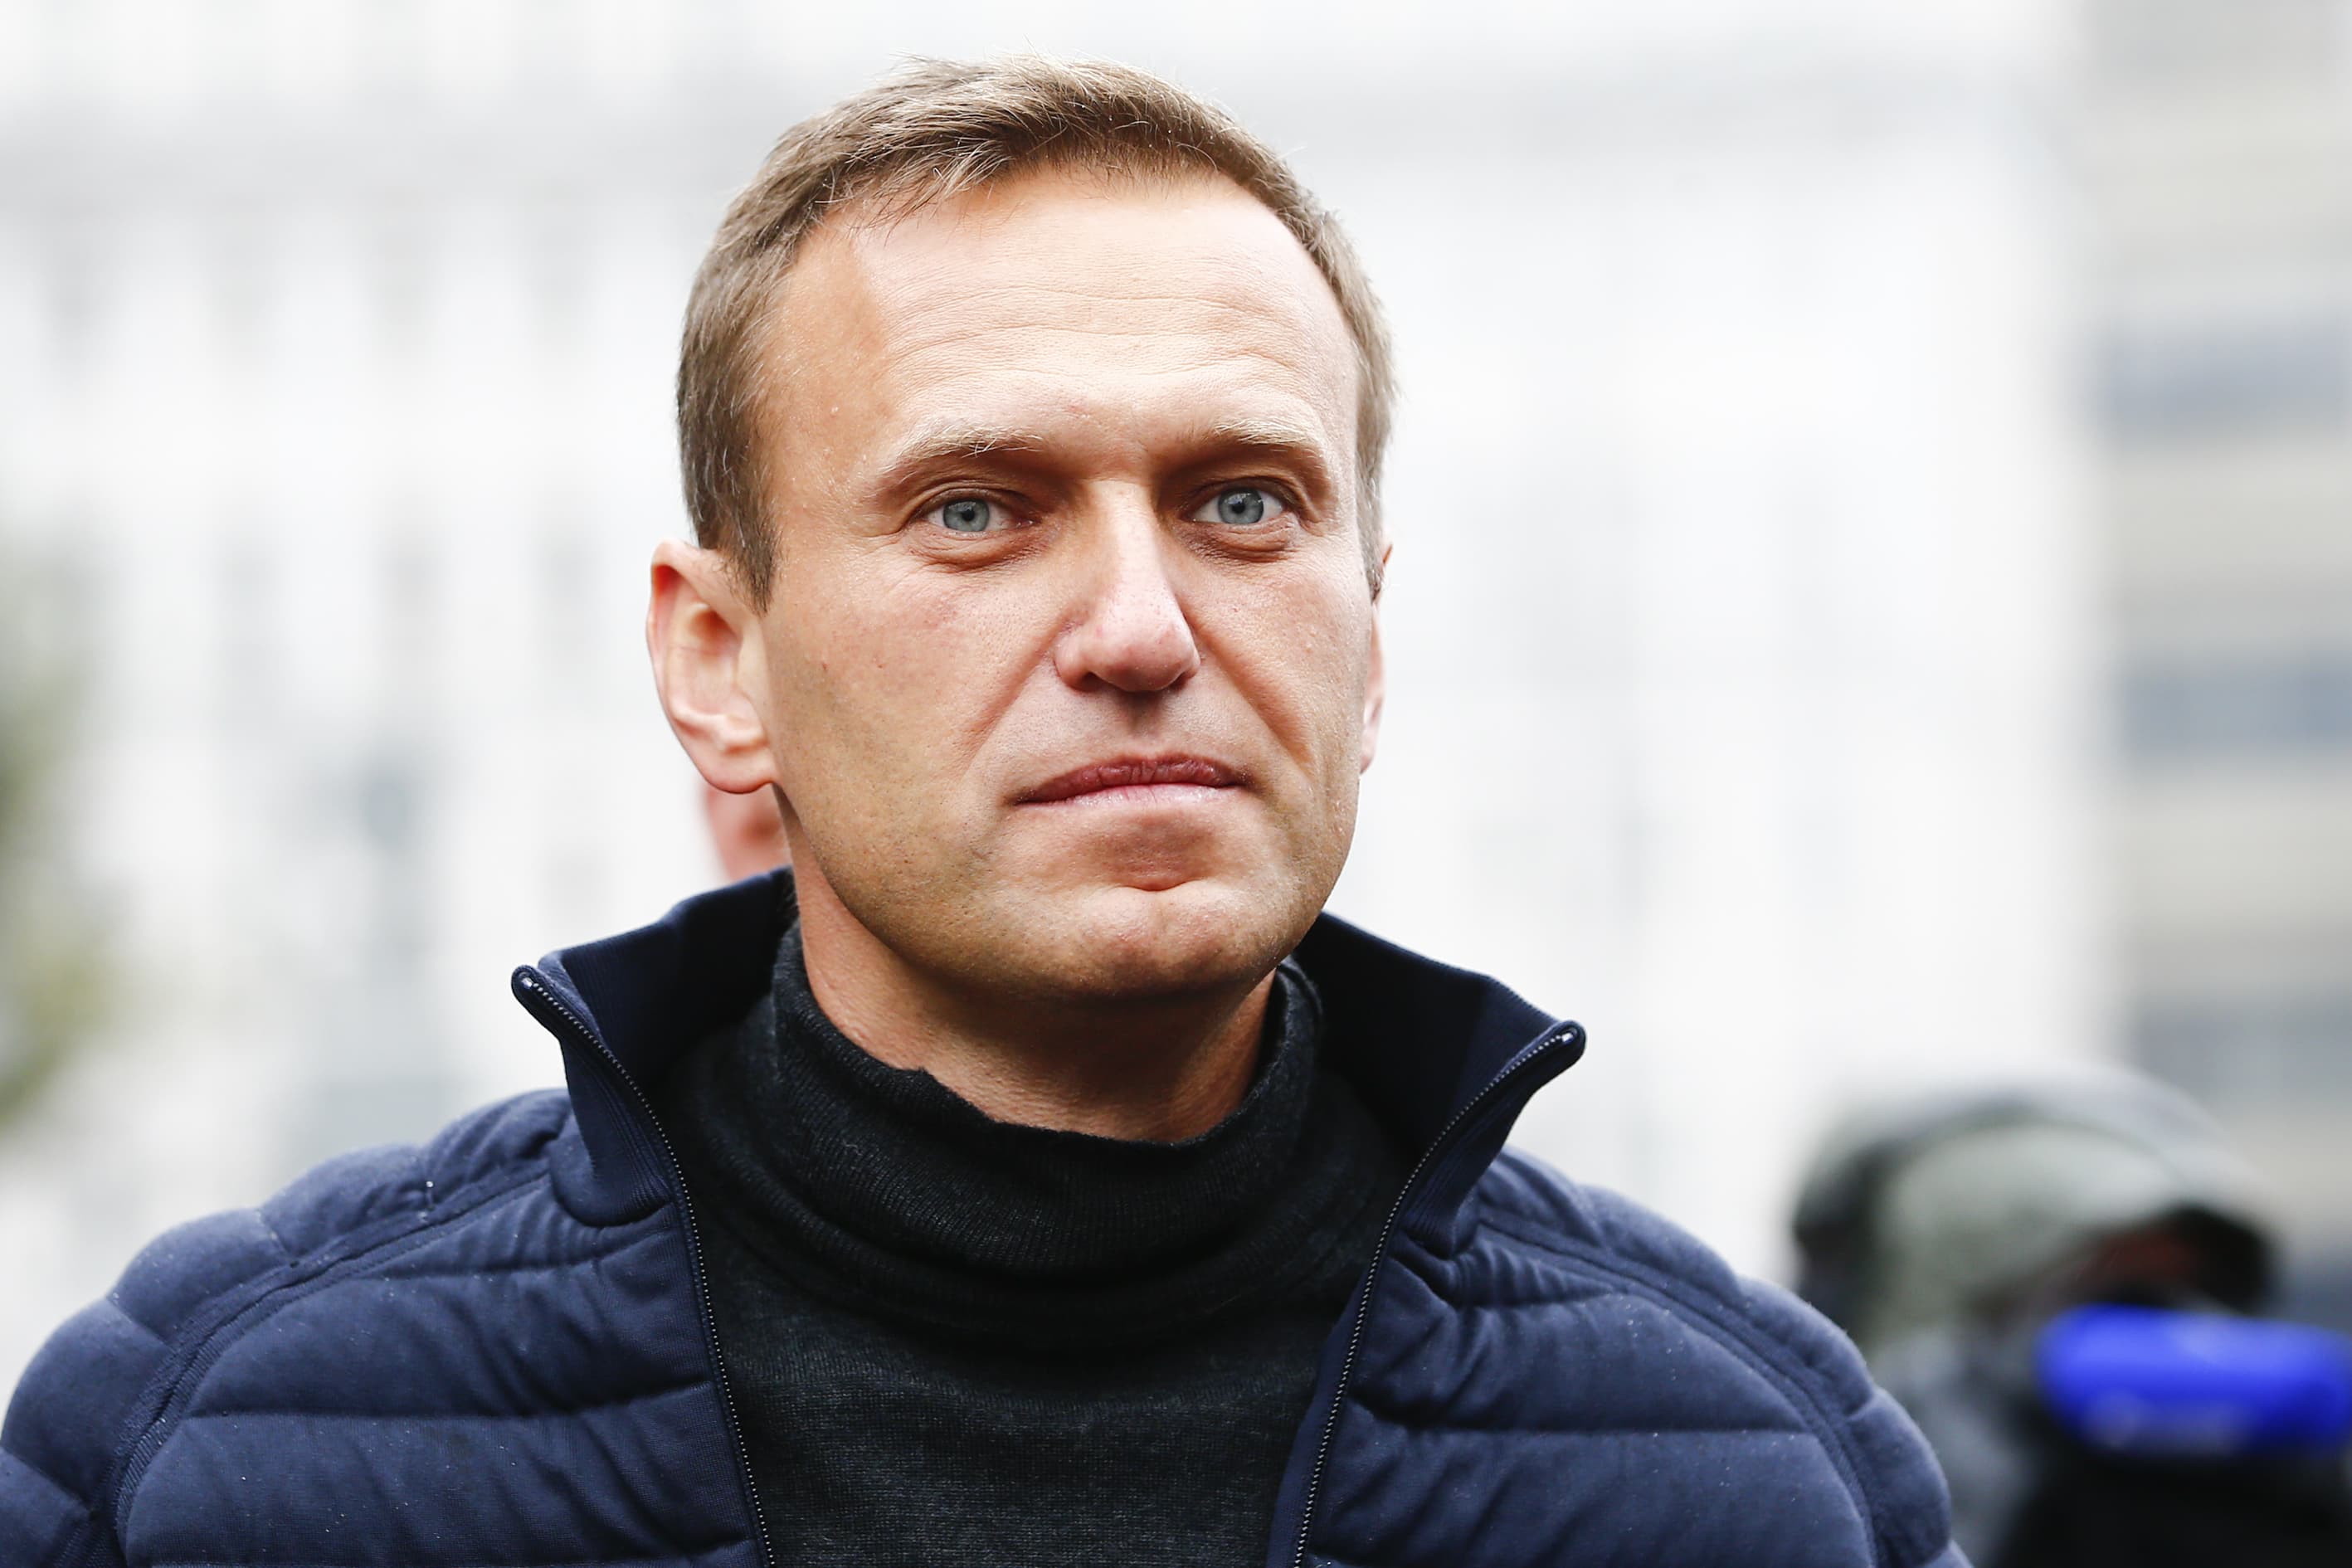 Russian dissident Alexei Navalny poisoned 'without a doubt' by Novichok nerve agent, Germany says